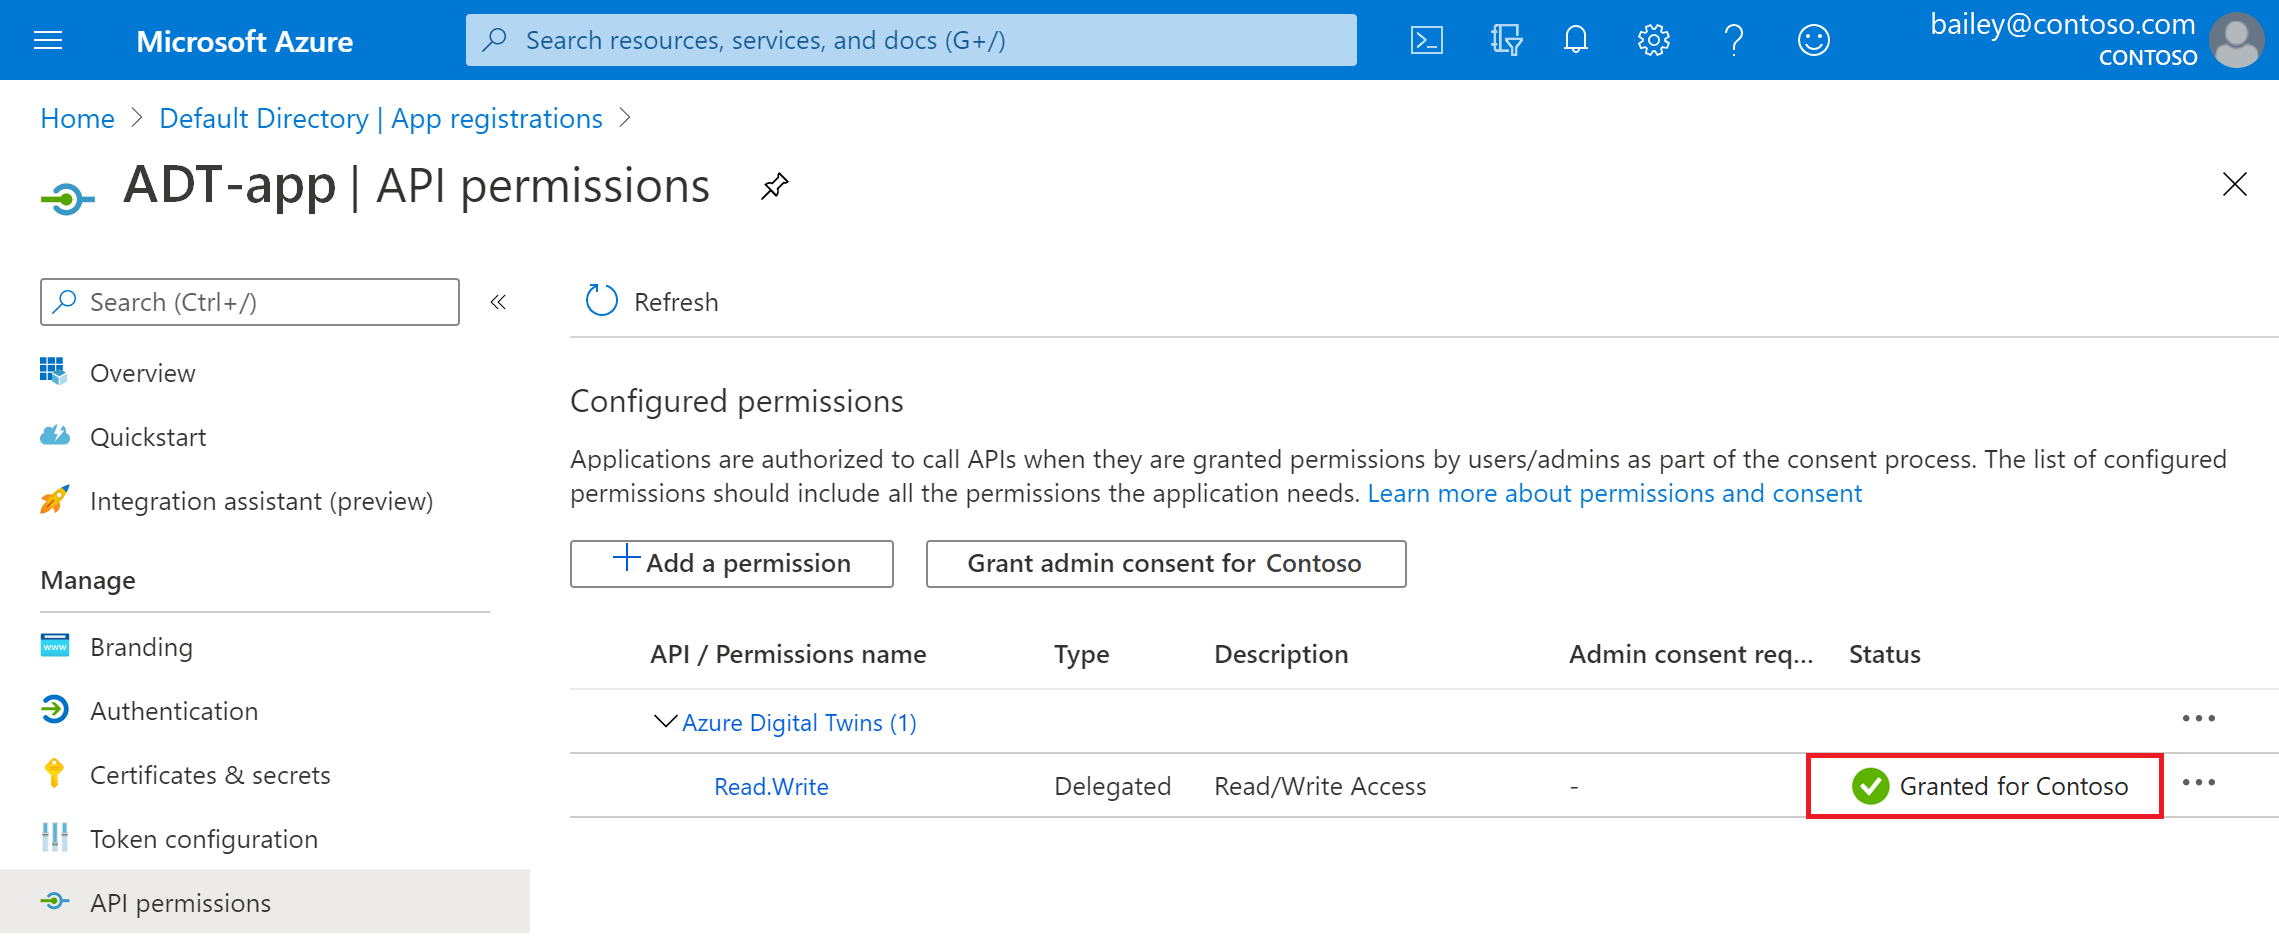 Screenshot of the Azure portal showing the admin consent granted for the company under API permissions.